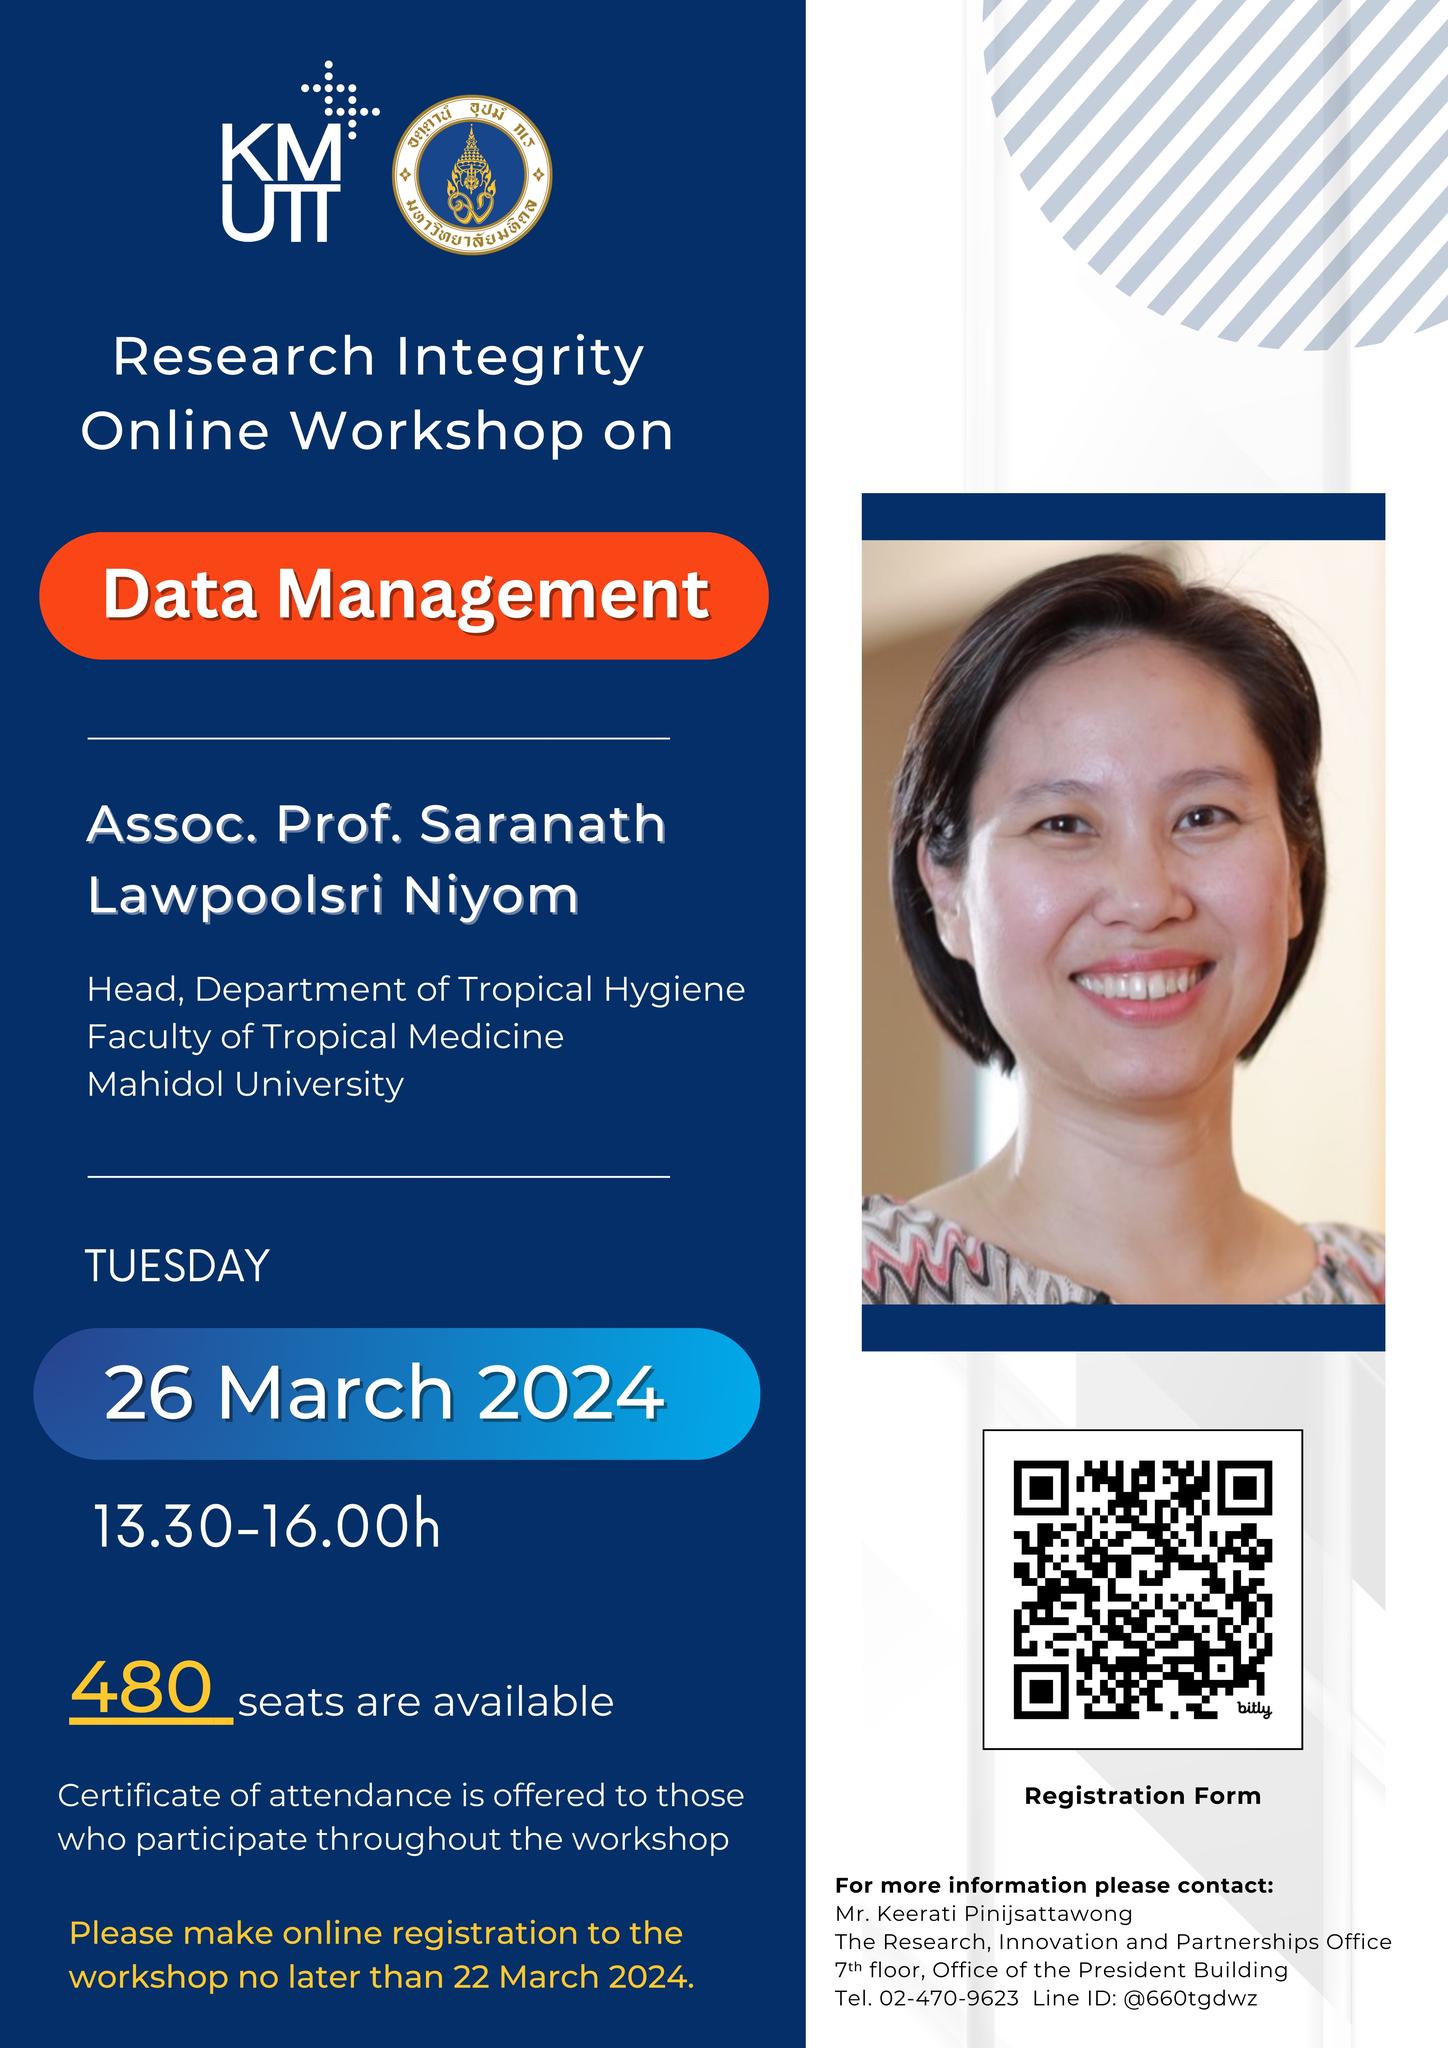 Research Integrity Online Workshop on Data Management